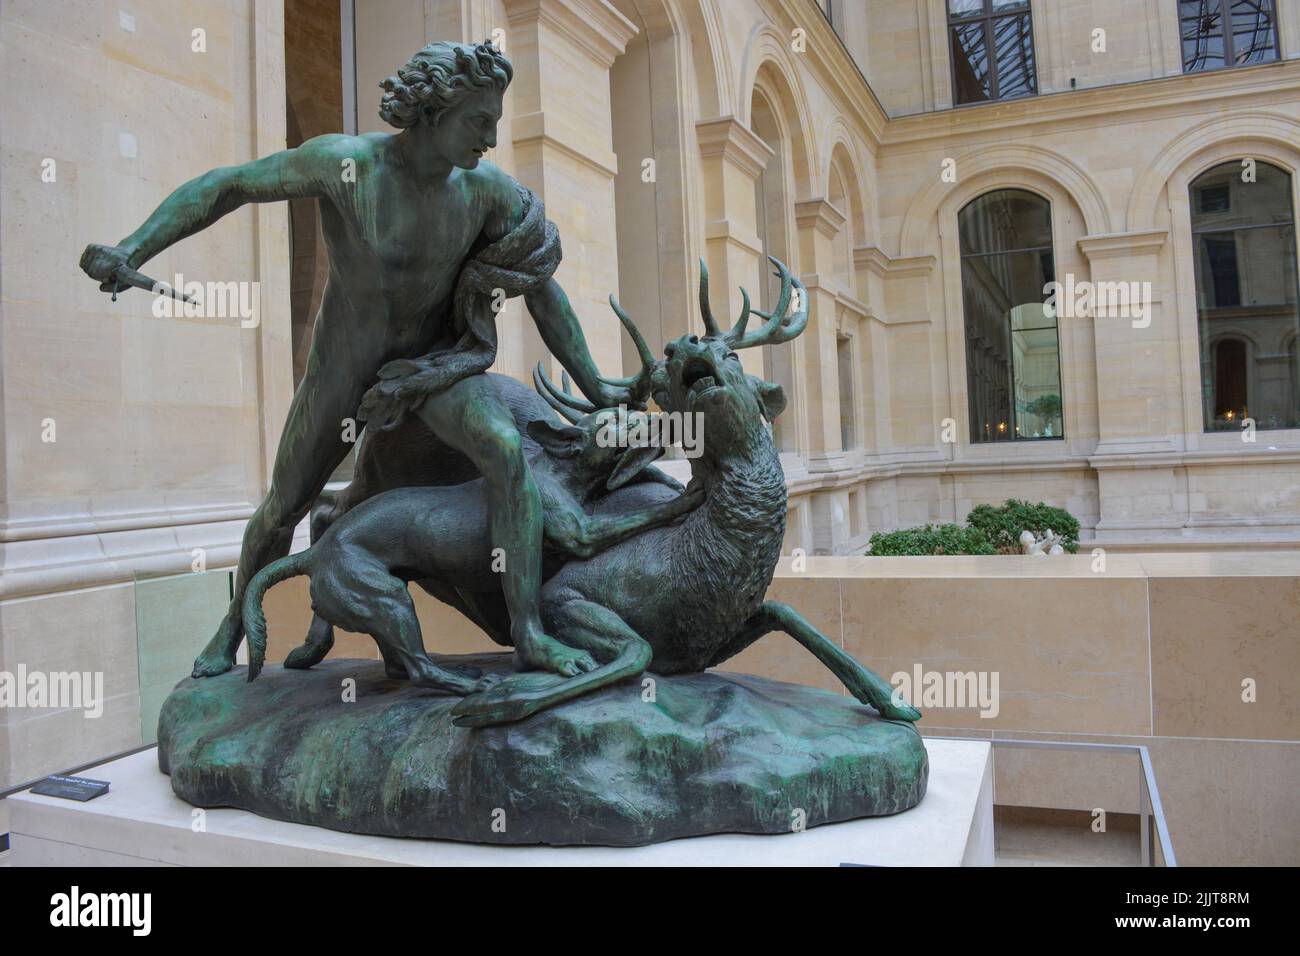 The statue of a man killing a deer in museum, Paris, France Stock Photo